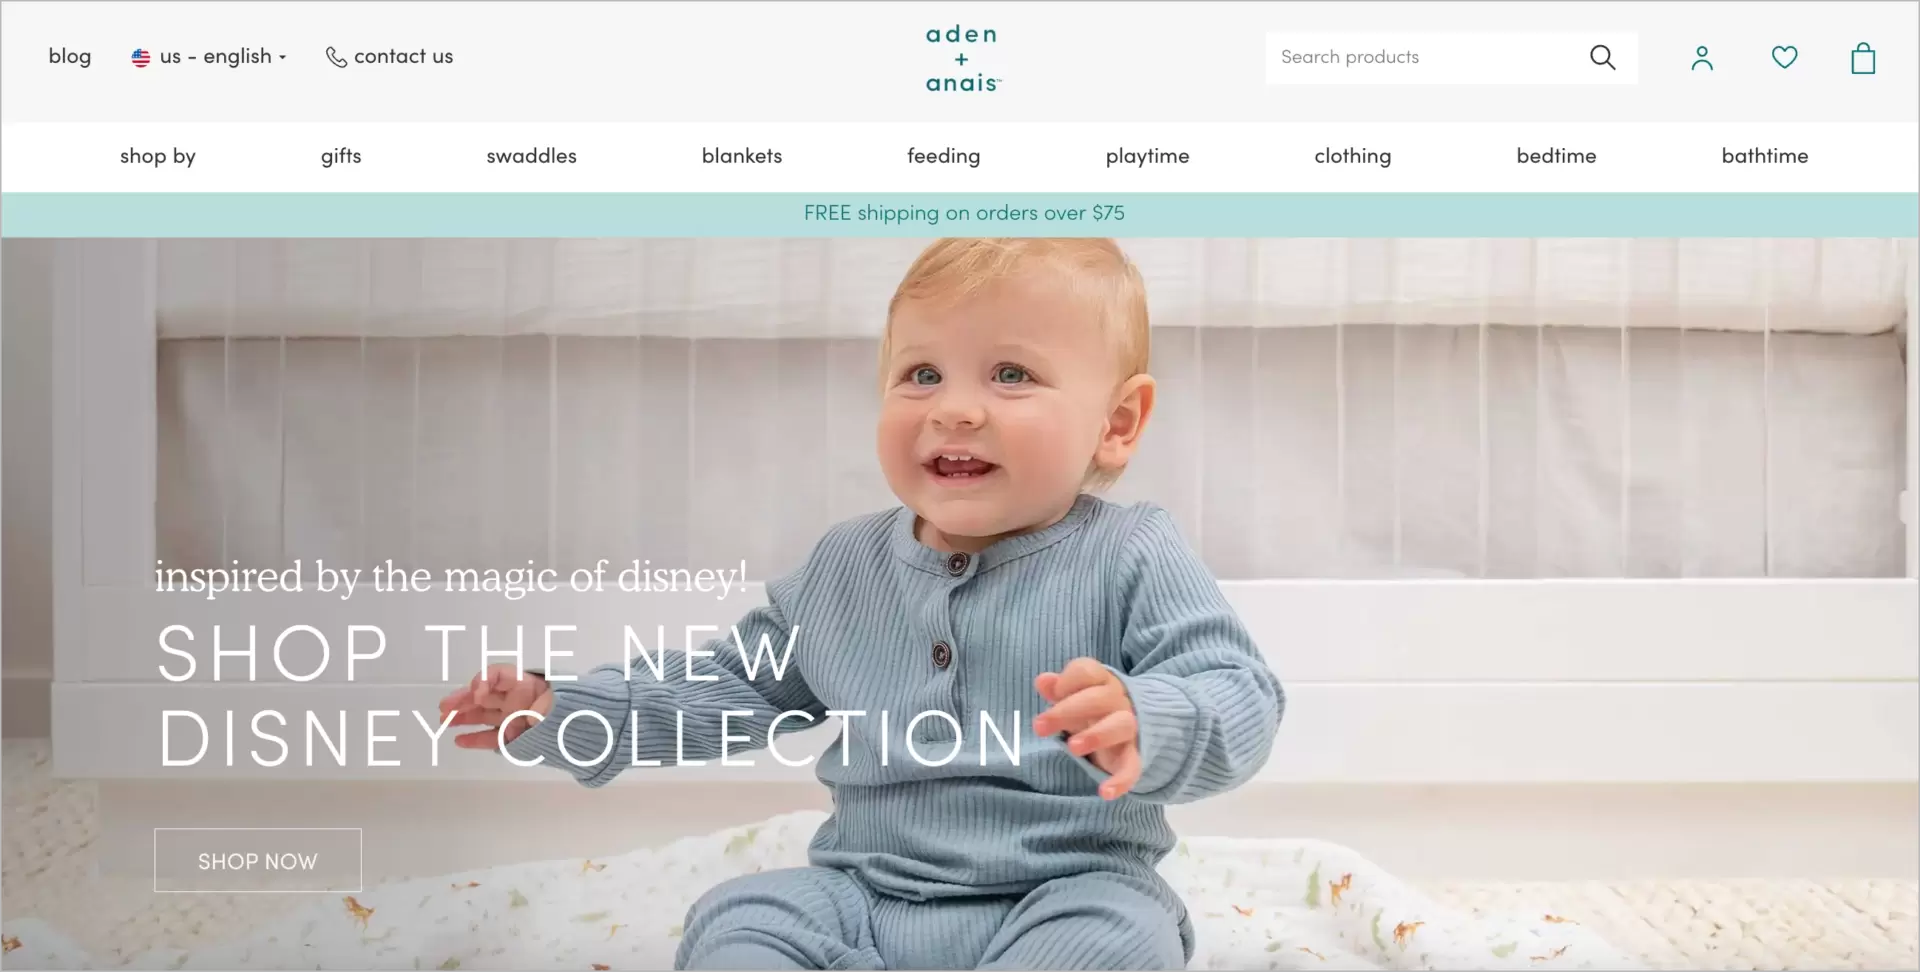 ecommerce site selling baby care products